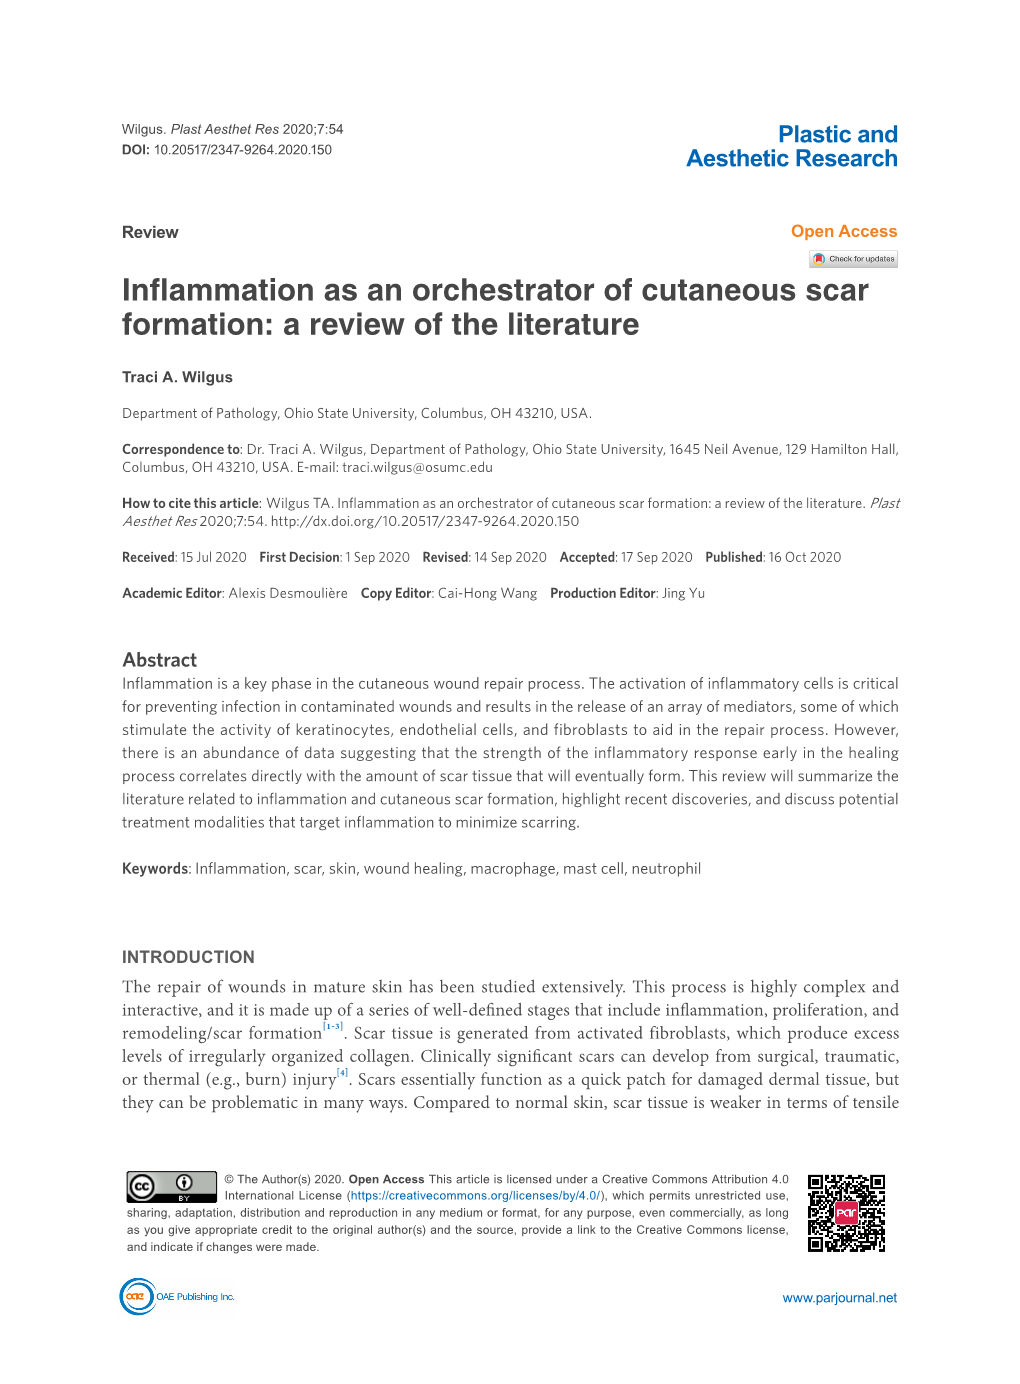 Inflammation As an Orchestrator of Cutaneous Scar Formation: a Review of the Literature